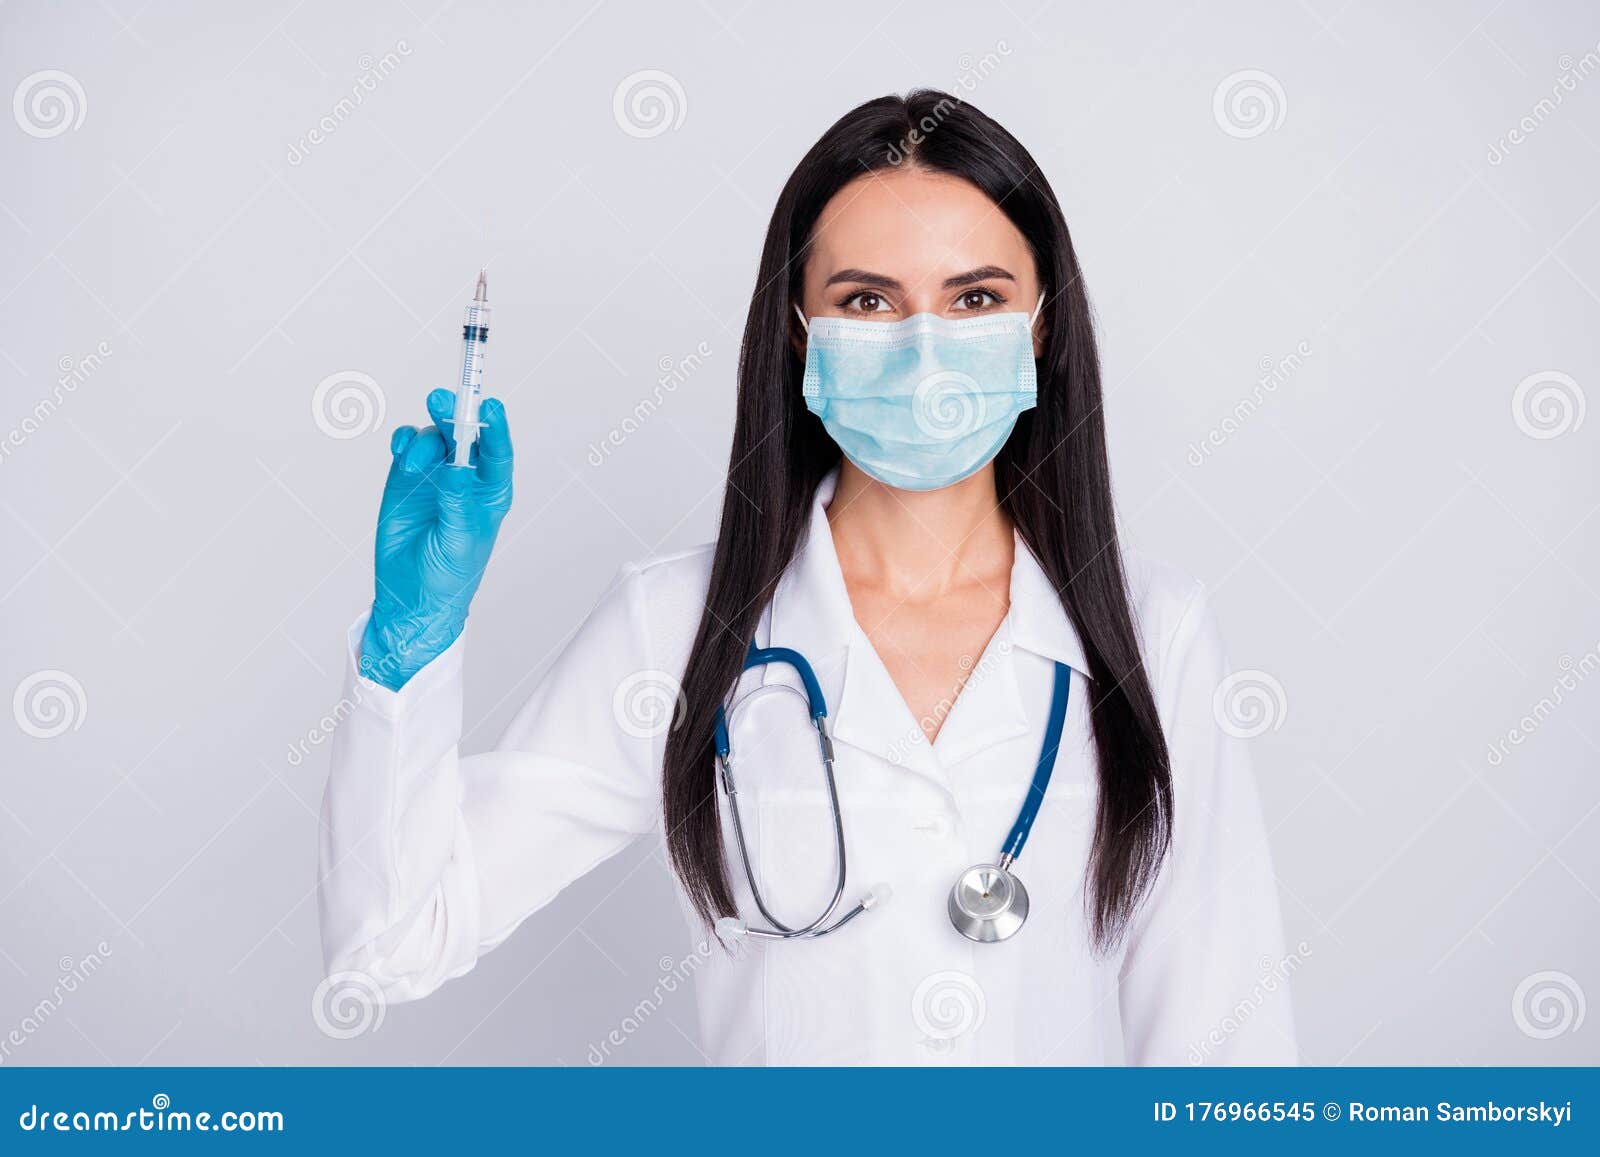 photo of beautiful doc lady ready for operation young professional surgeon hold anesthesia syringe wear mask gloves